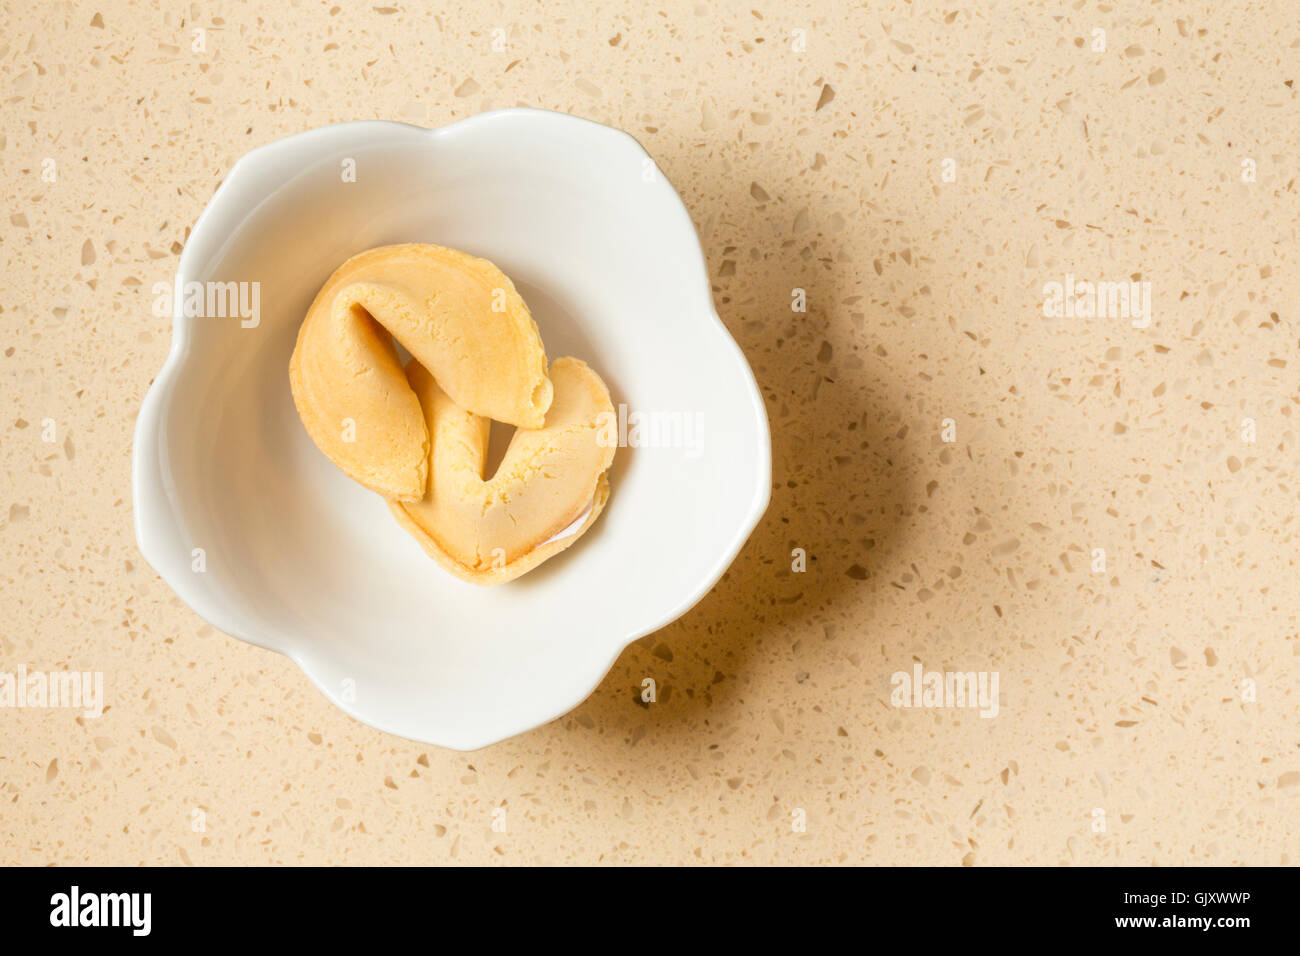 Two Chinese fortune cookies in a white ceramic bowl on a quartz engineered stone countertop in contemporary upscale home kitchen interior Stock Photo